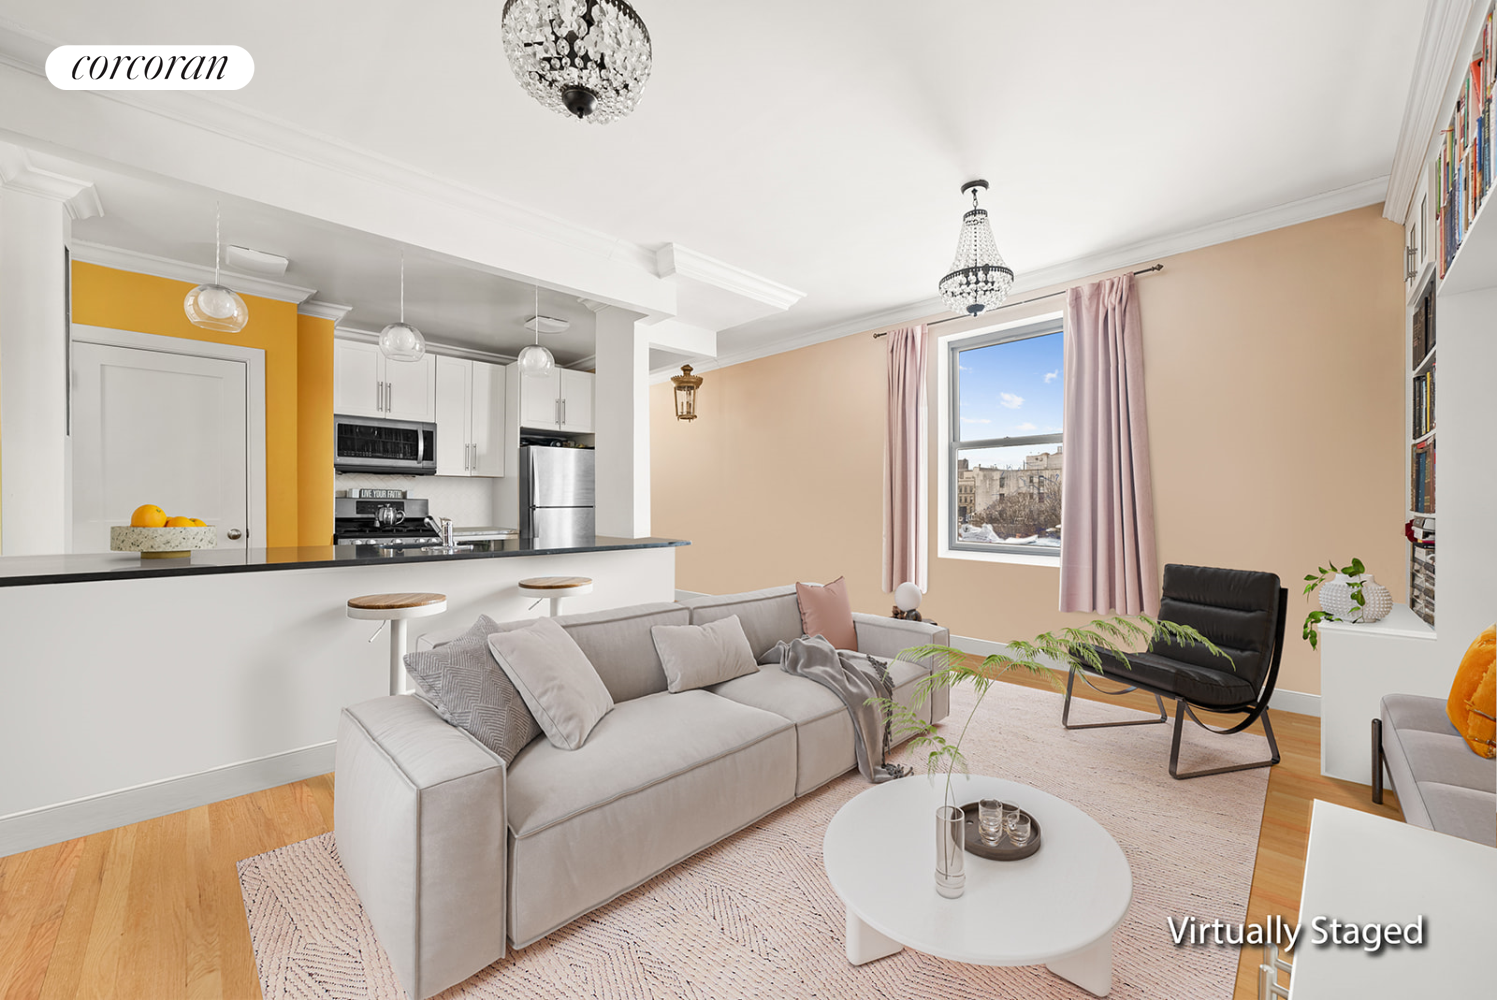 42 West 120th Street 5D, South Harlem, Upper Manhattan, NYC - 2 Bedrooms  
2 Bathrooms  
4 Rooms - 